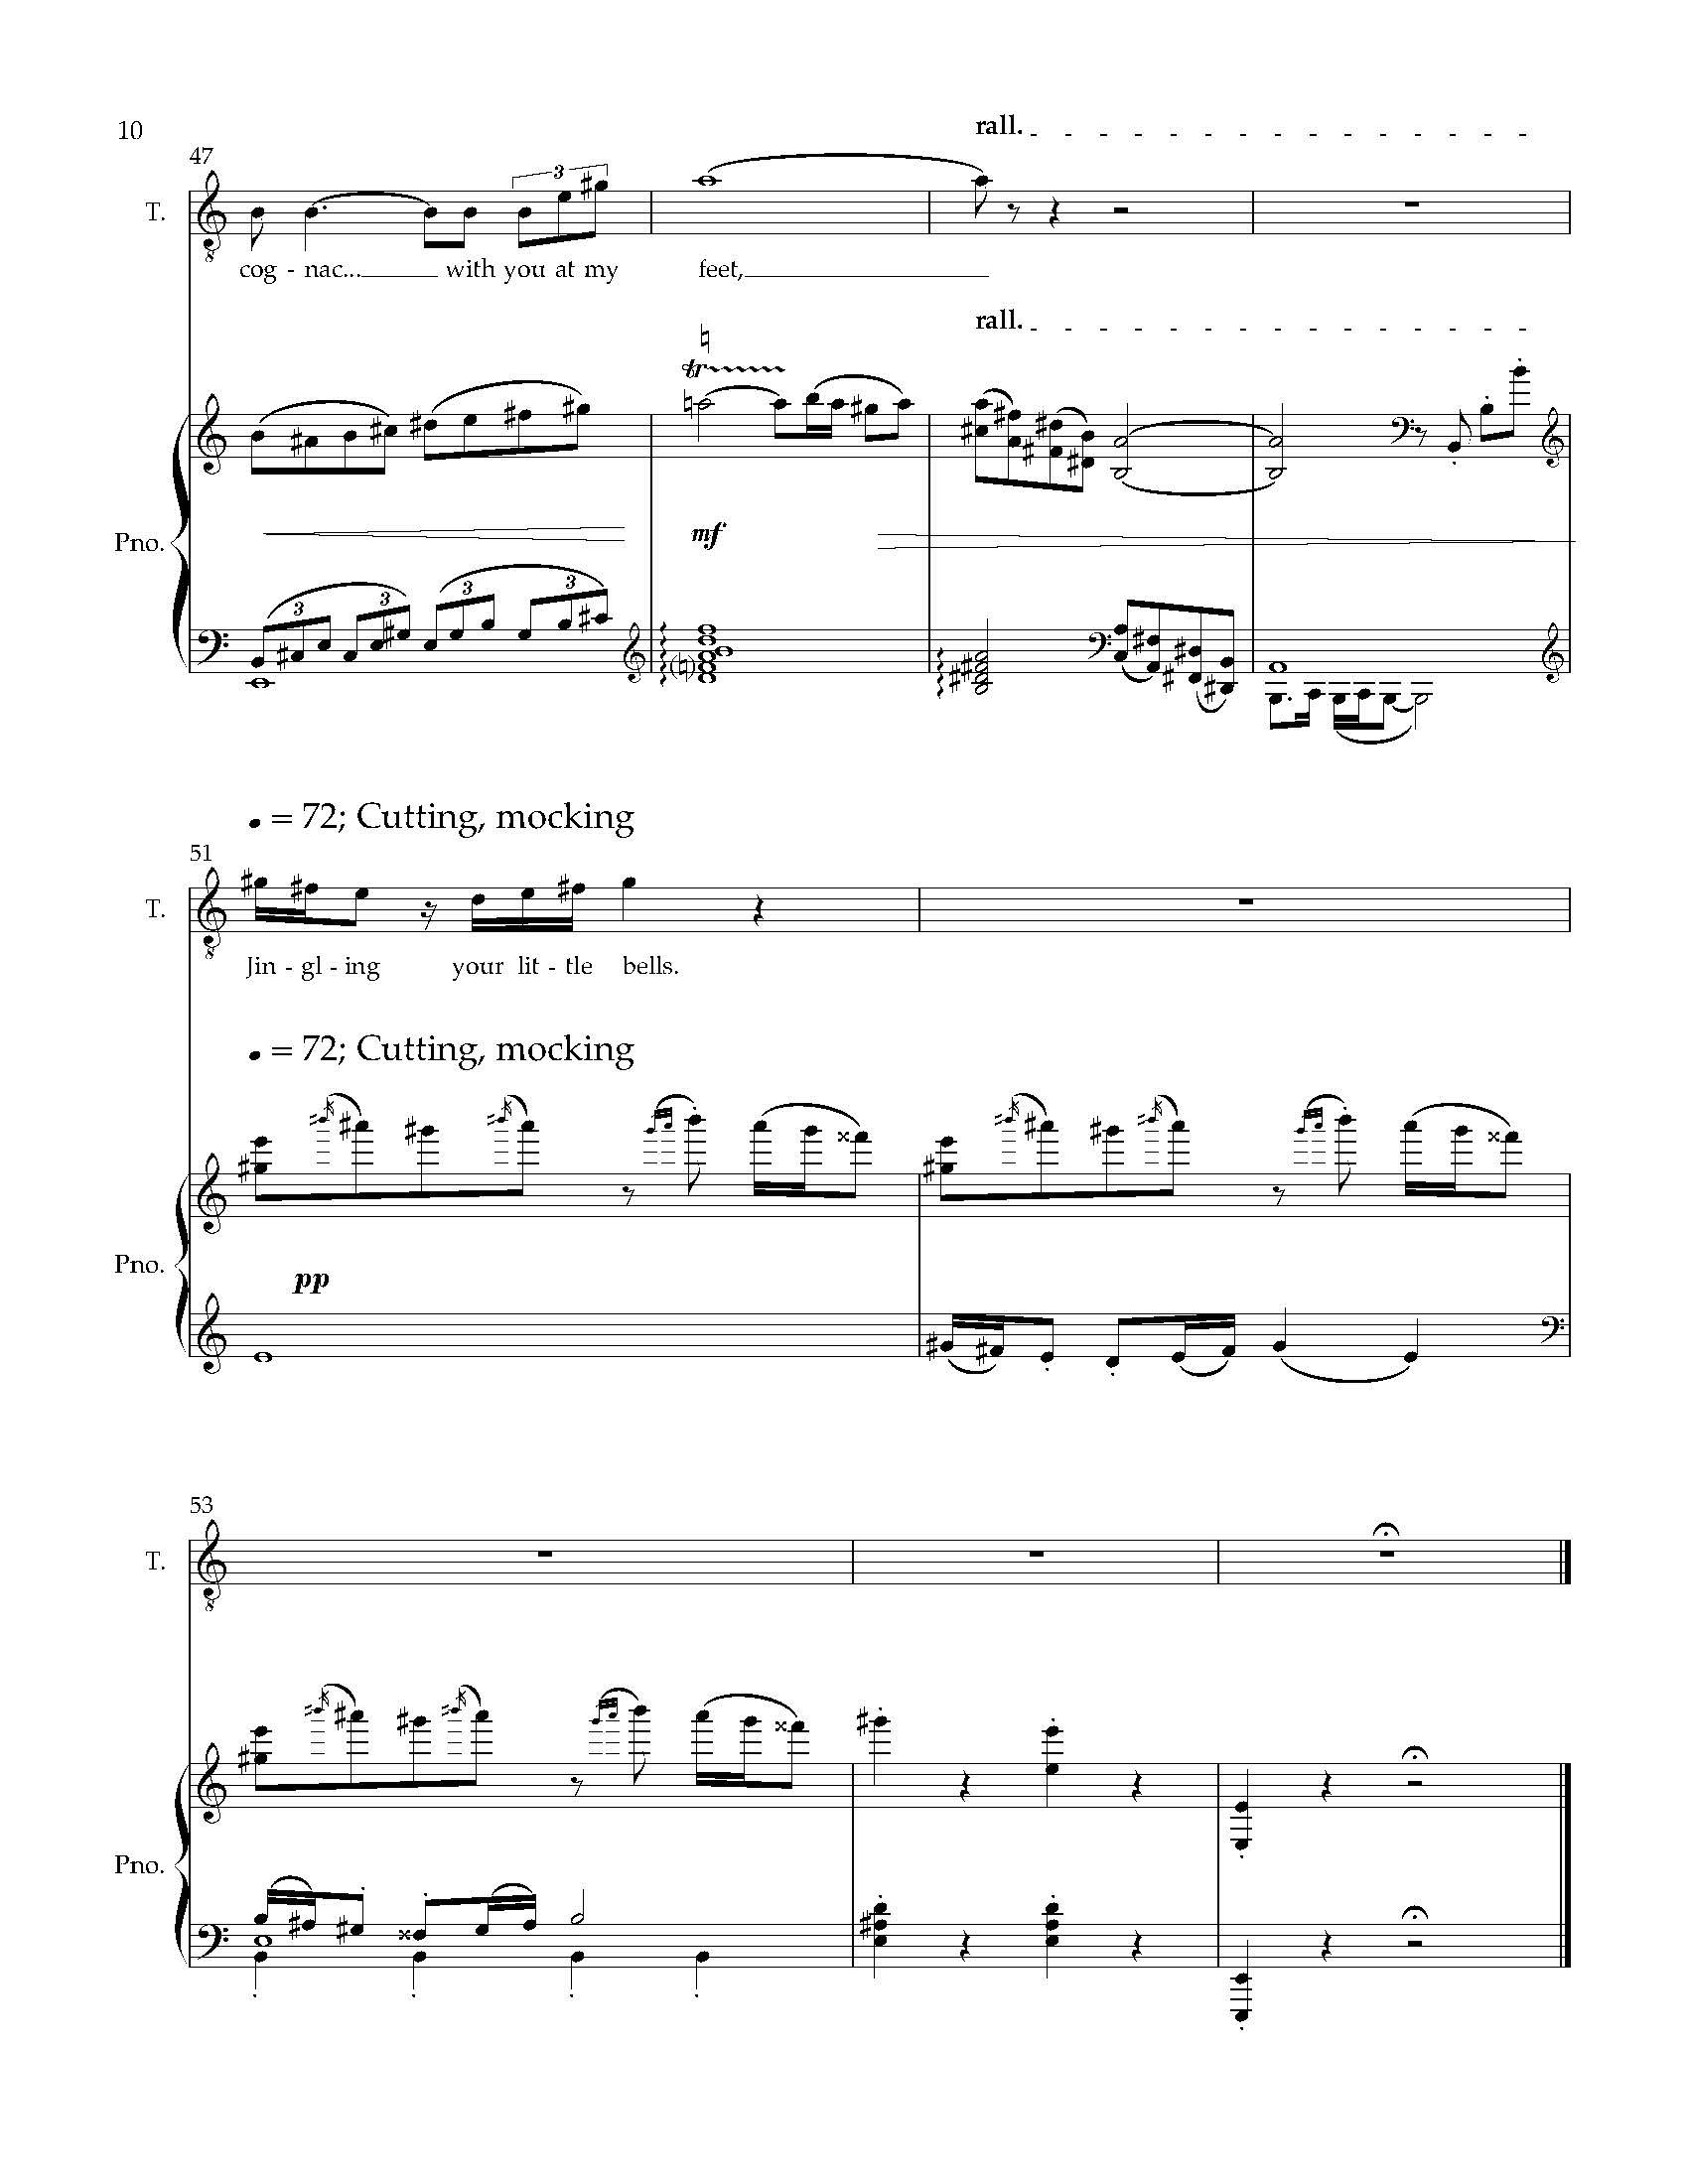 Five Arias from HWGS - Complete Score (1)_Page_14.jpg